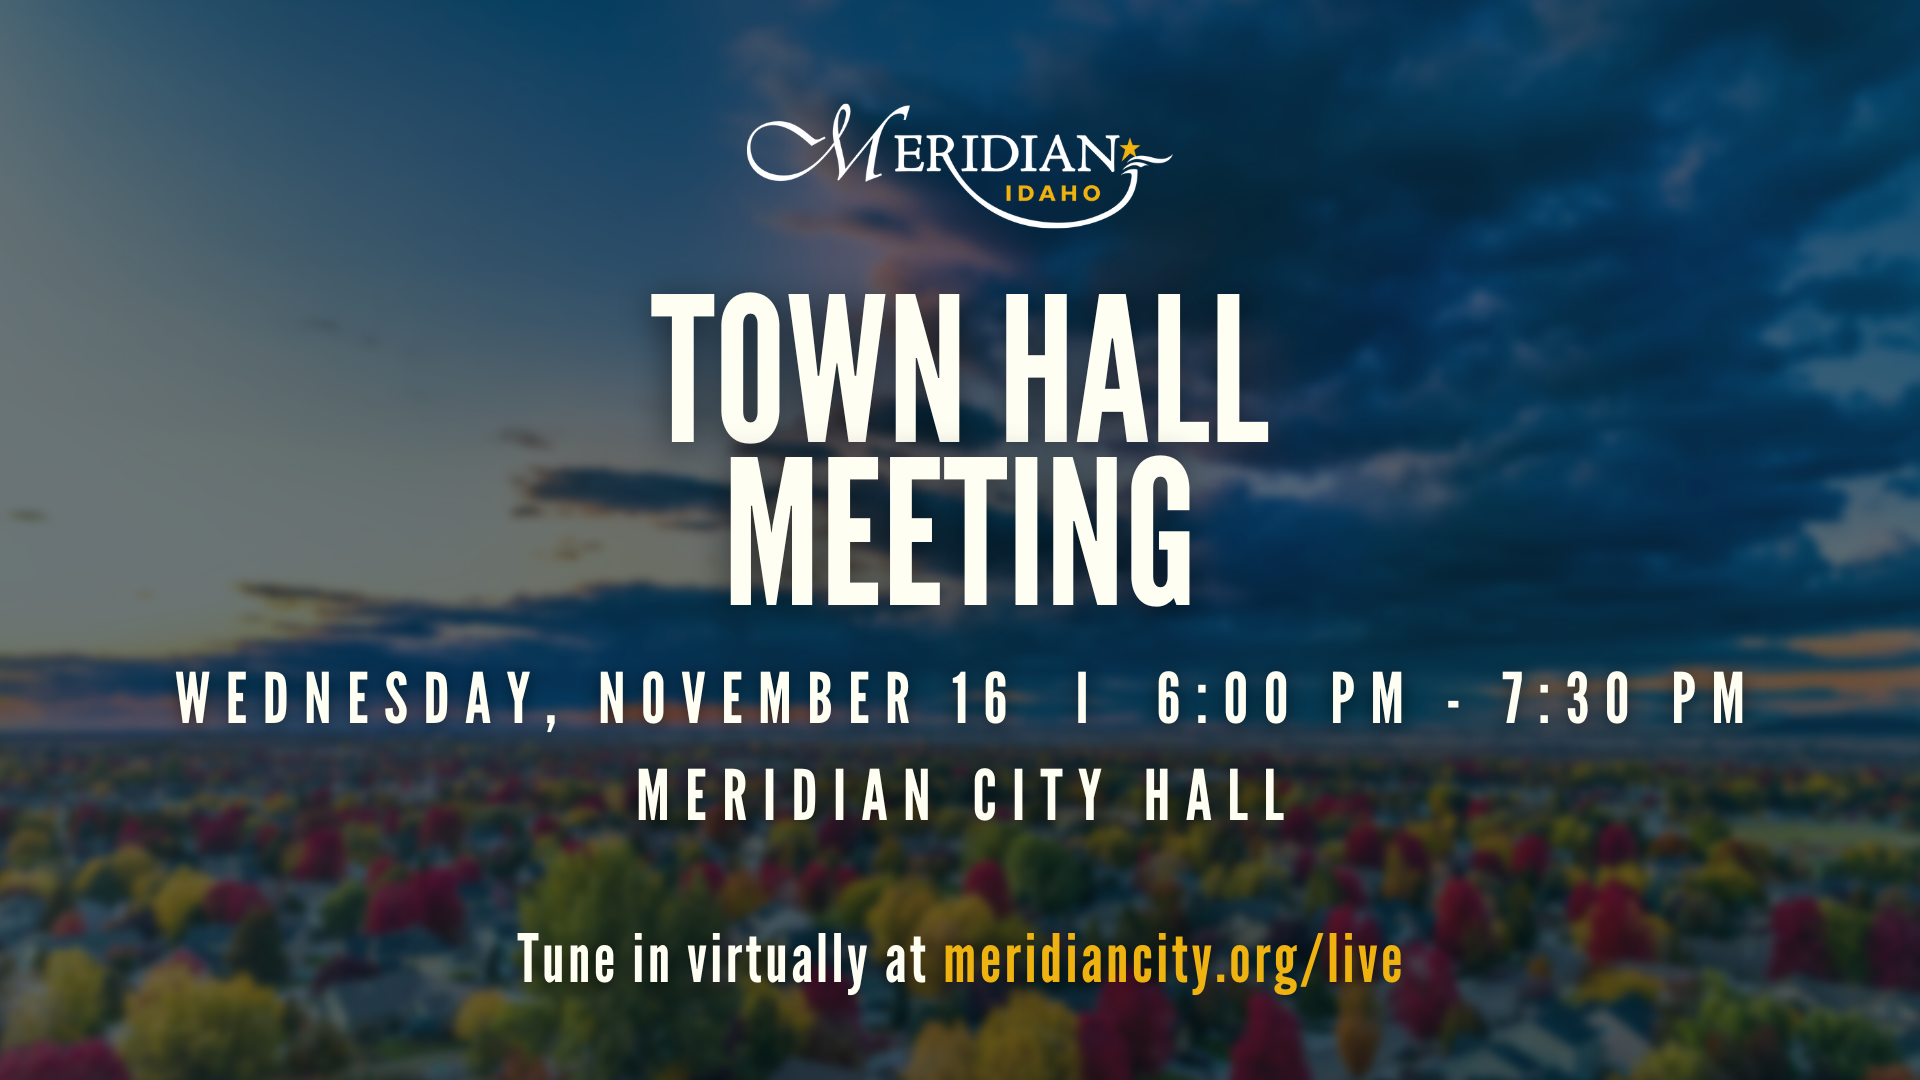 Graphic with a blurred background showcasing a Meridian sunset in autumn with multicolored trees in the lower third and a partly cloudy sky in the upper two-thirds. Meridian, Idaho logo is at the top centered, followed by text that says TOWN HALL MEETING, Wednesday, November 16, 6:00 PM - 7:30 PM, Meridian City Hall, and a line at the bottom which states, "Tune in virtually at meridiancity.org/live".